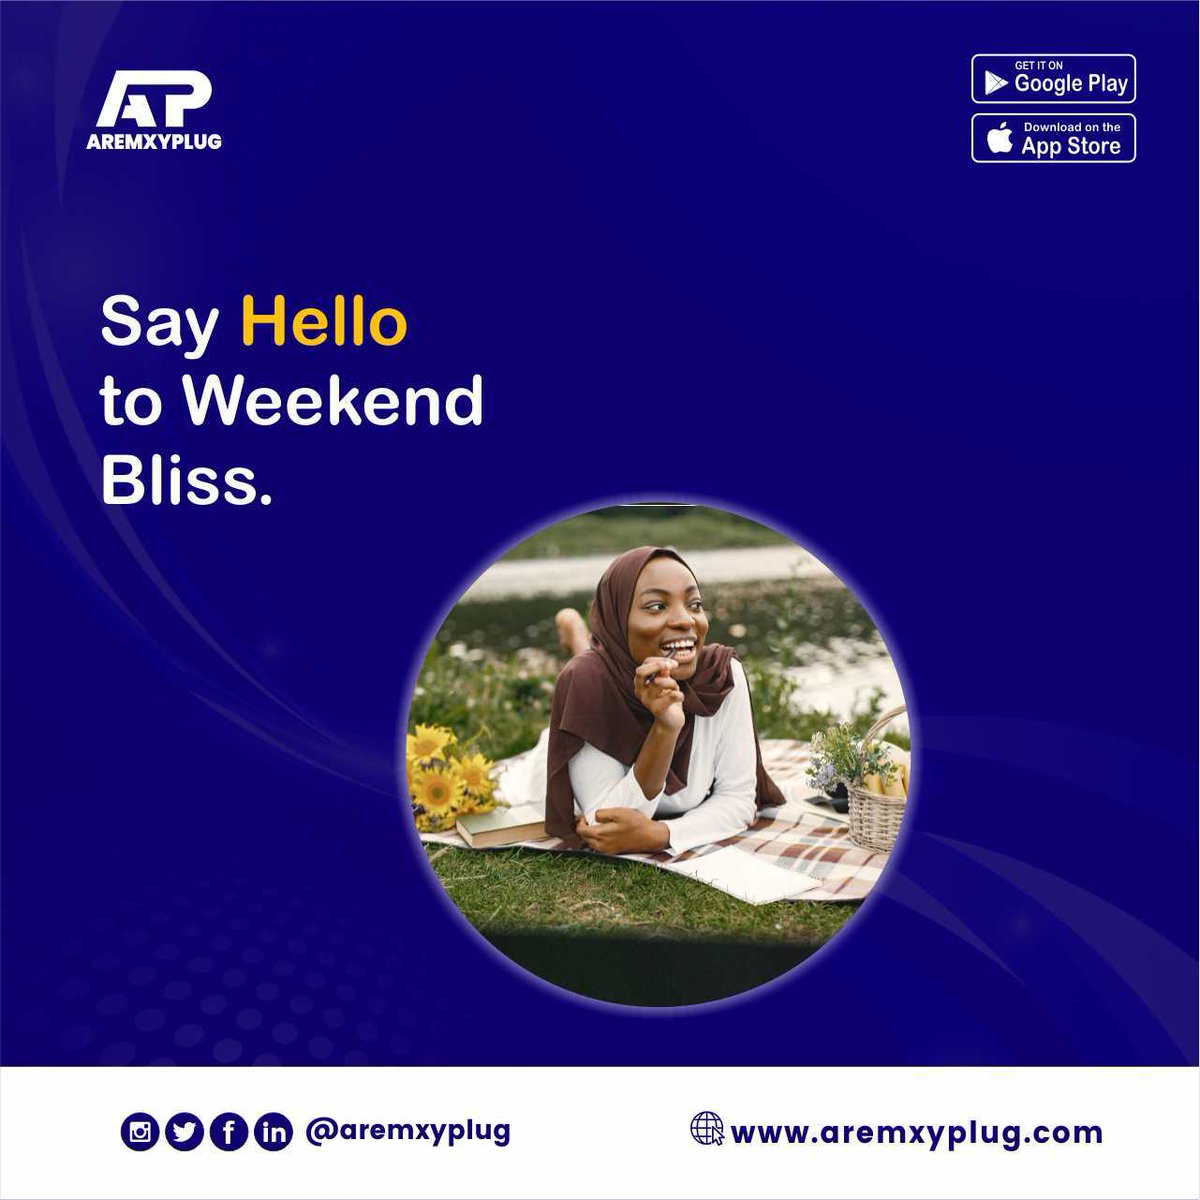 Time to say goodbye to work stress and hello to weekend bliss!

#TGIF
#FeelGoodFriday
#AremxyPlug